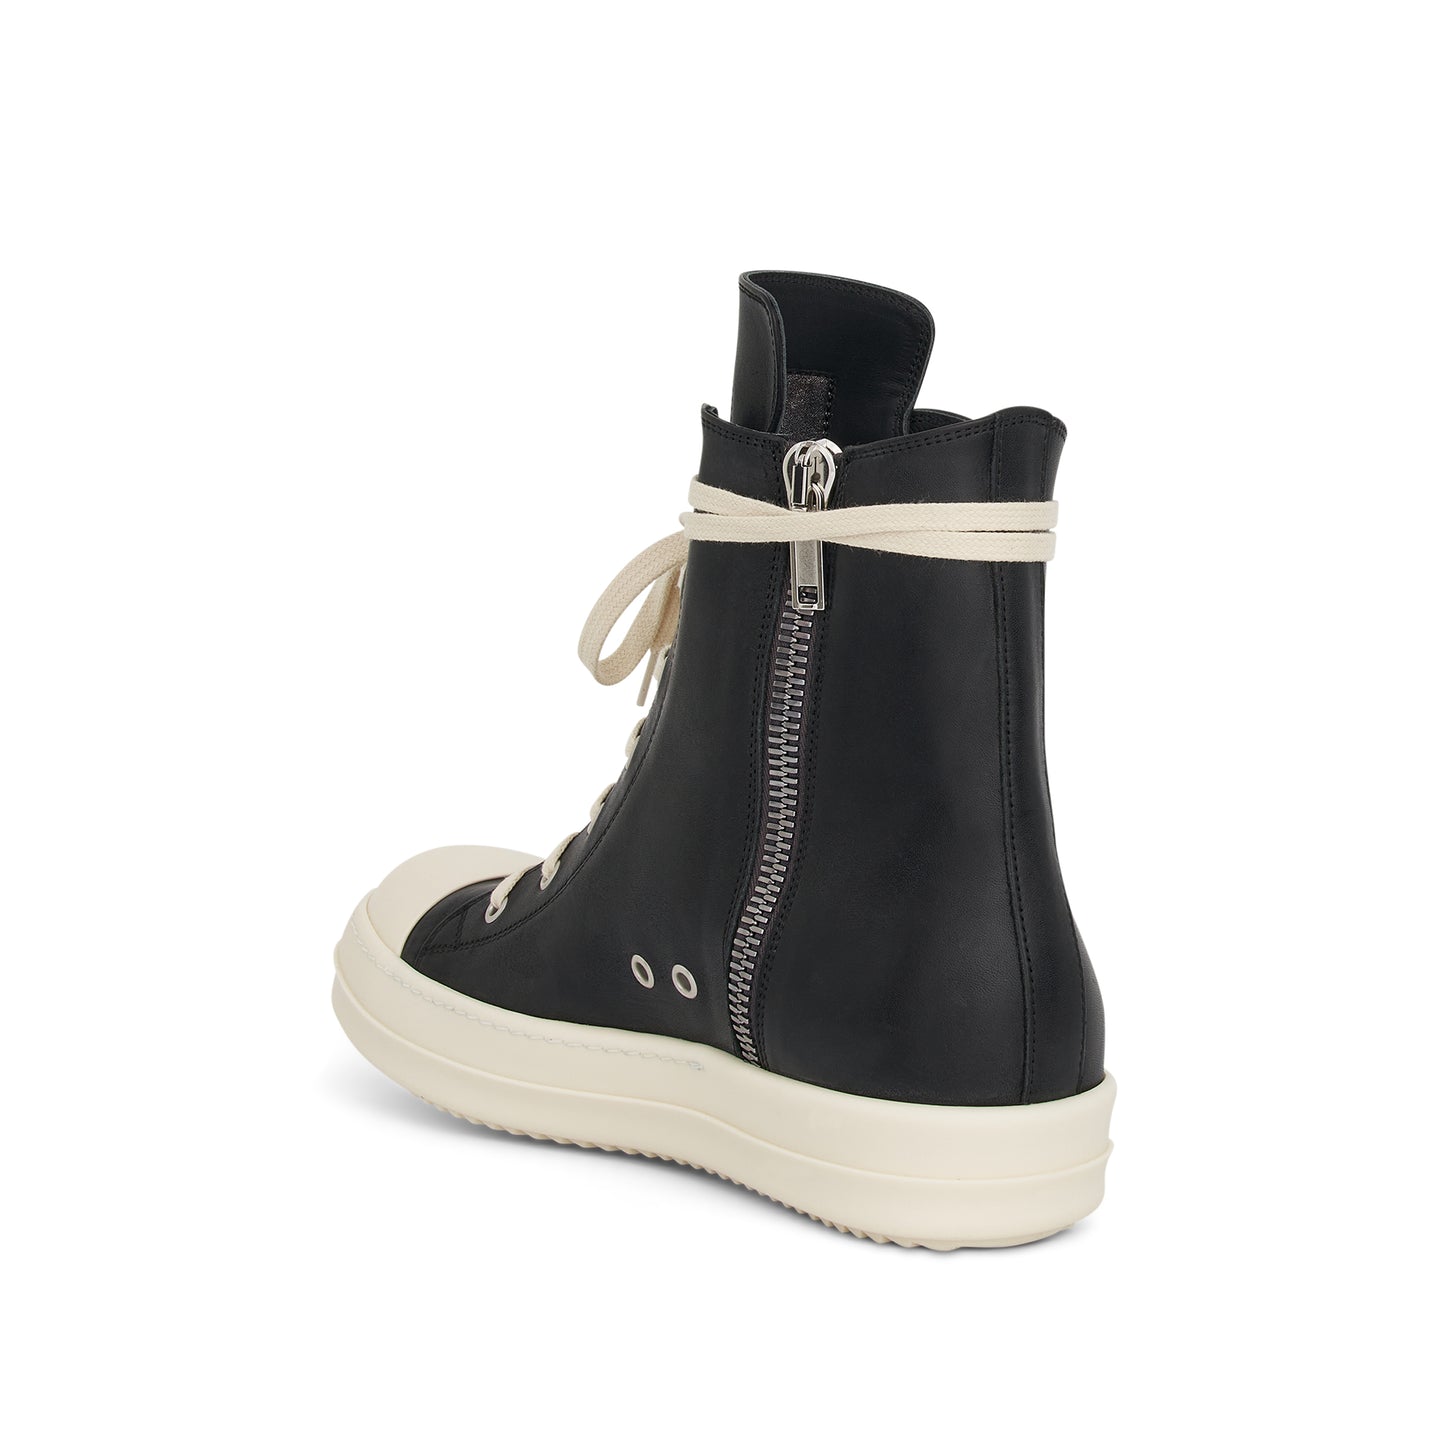 Washed Calf High Top Leather Sneaker in Black/Milk